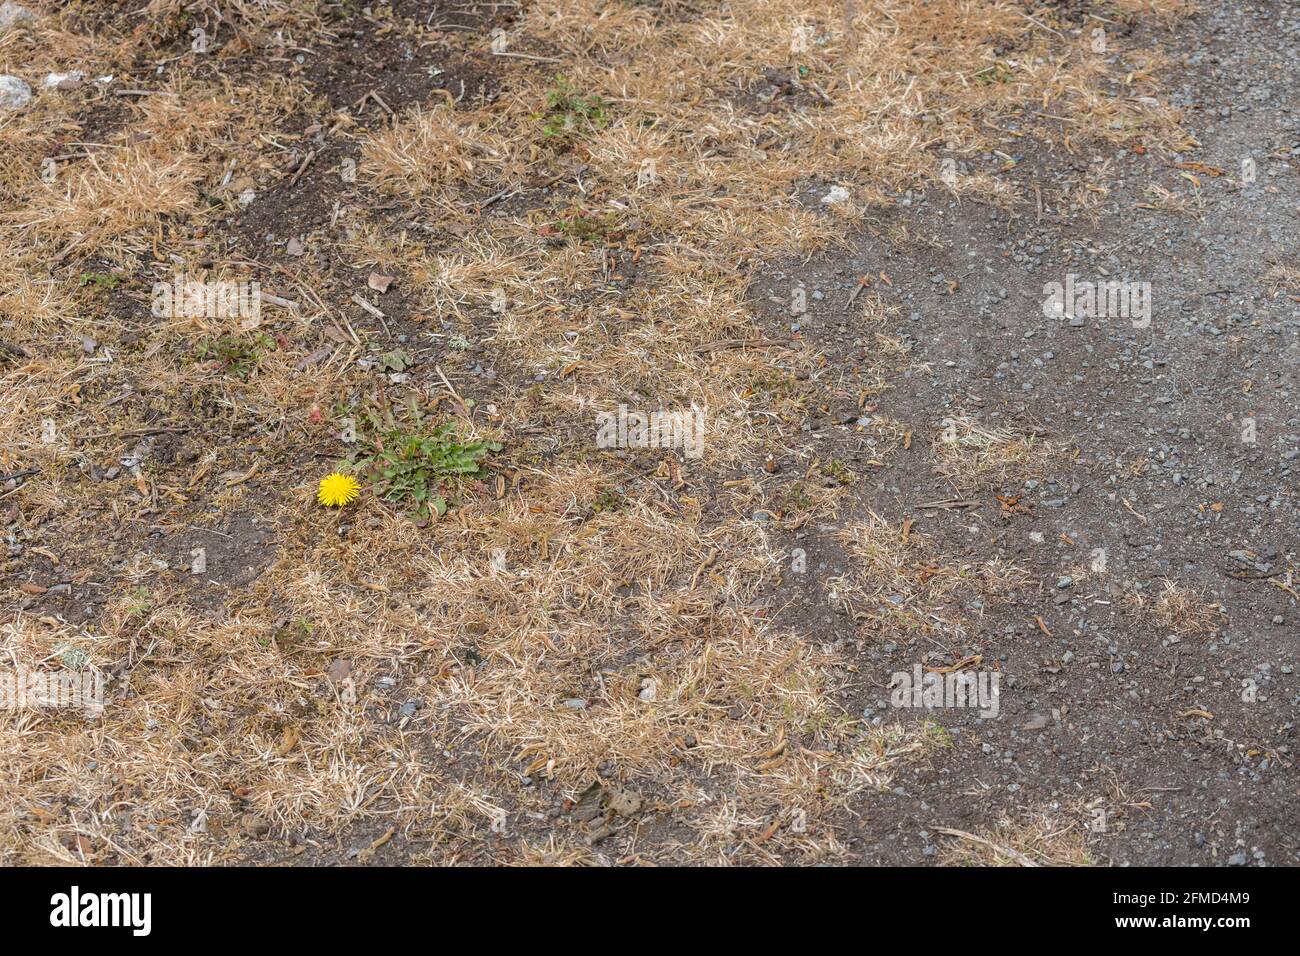 Single yellow Dandelion / Taraxacum officinale flower with copy space growing in tarmac poisoned with weedkiller. Species is an old medicinal plant. Stock Photo